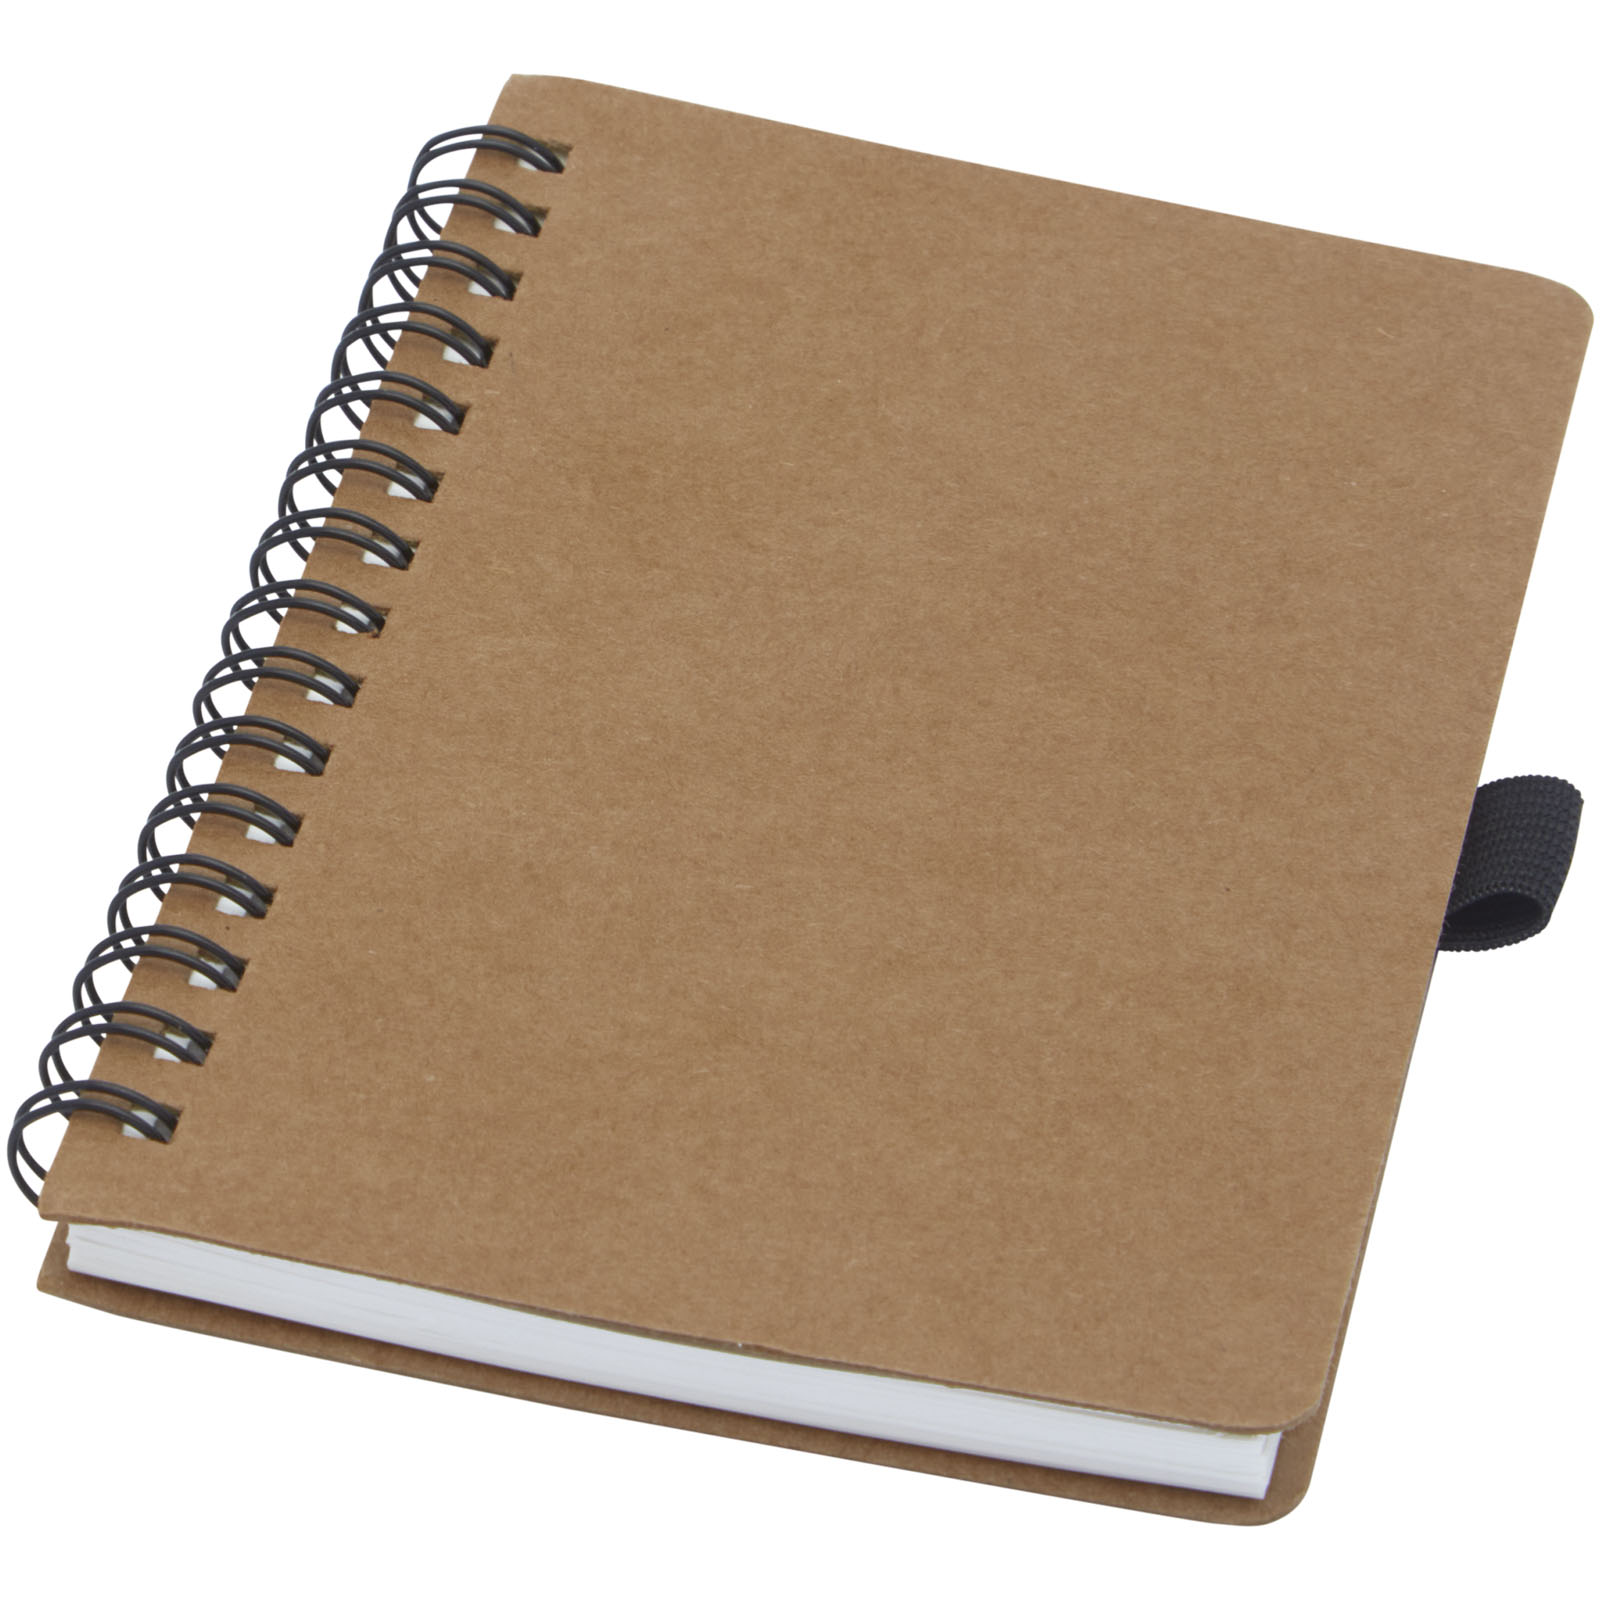 Advertising Notebooks - Cobble A6 wire-o recycled cardboard notebook with stone paper - 0